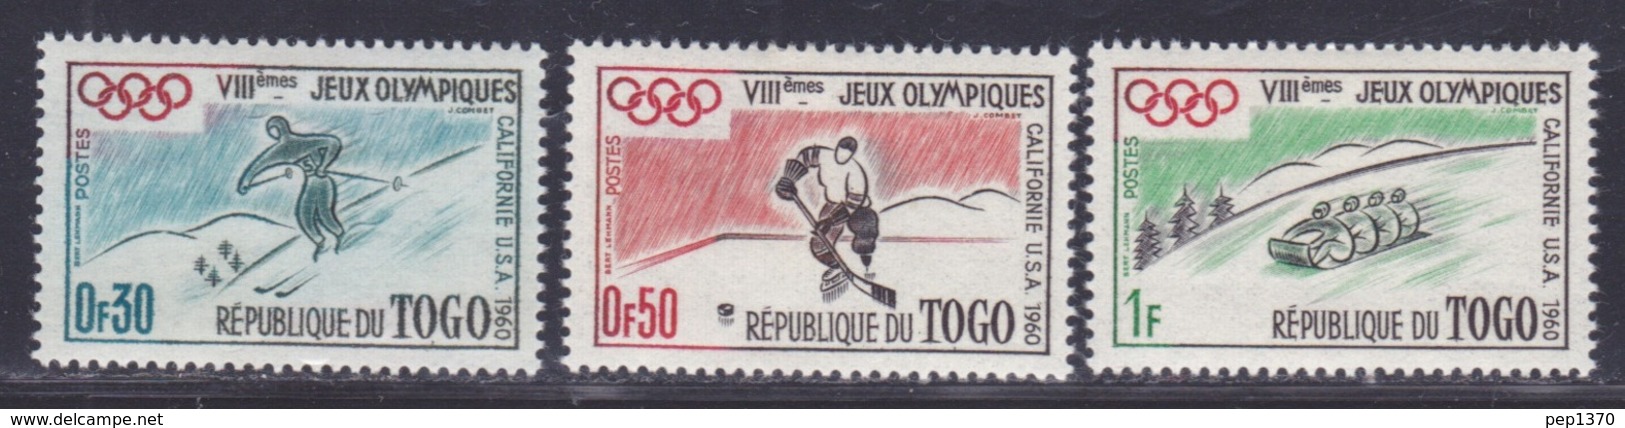 TOGO 1960 - JUEGOS OLIMPICOS SQUAW VALLEY - YVERT Nº 300/302** - Hiver 1960: Squaw Valley